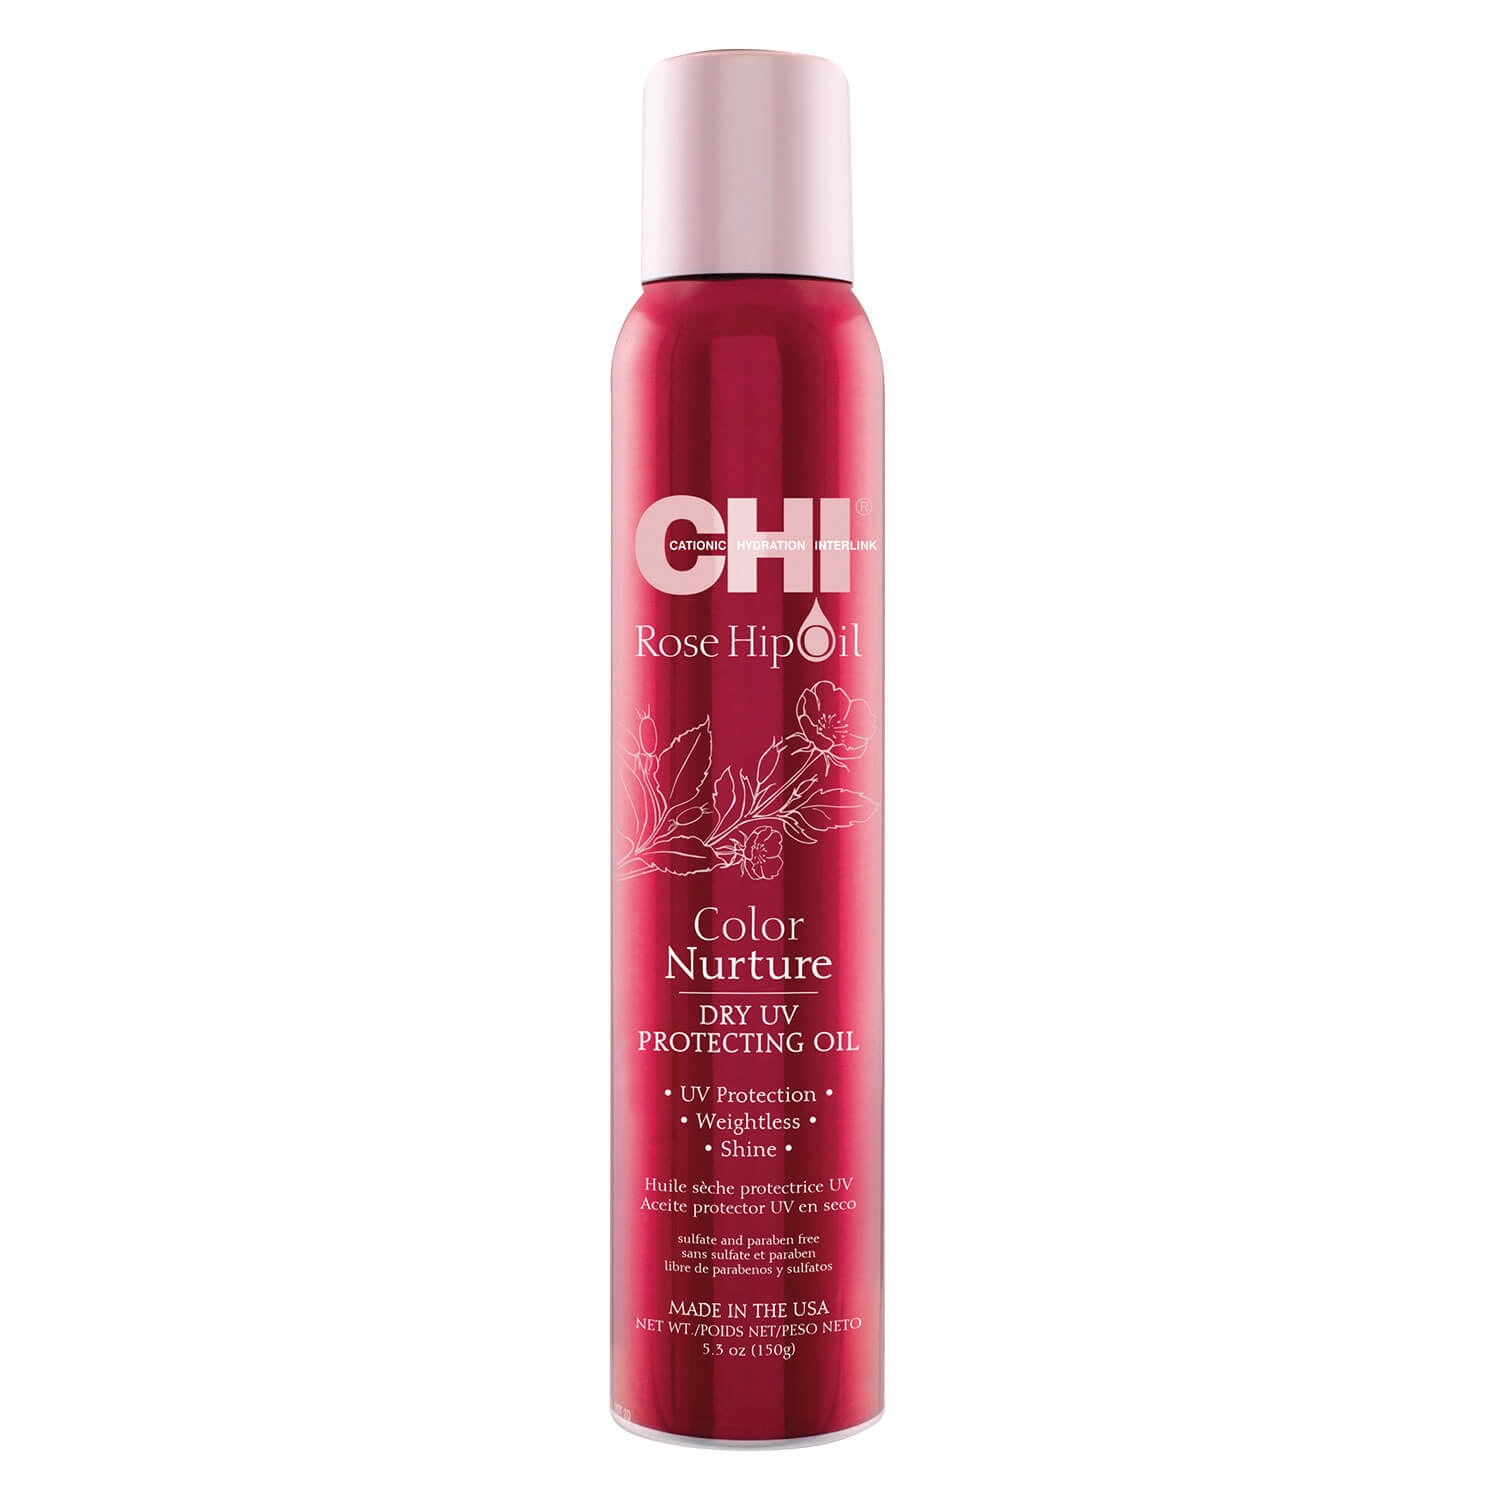 Product image from CHI Rose Hip Oil - UV Protecting Oil